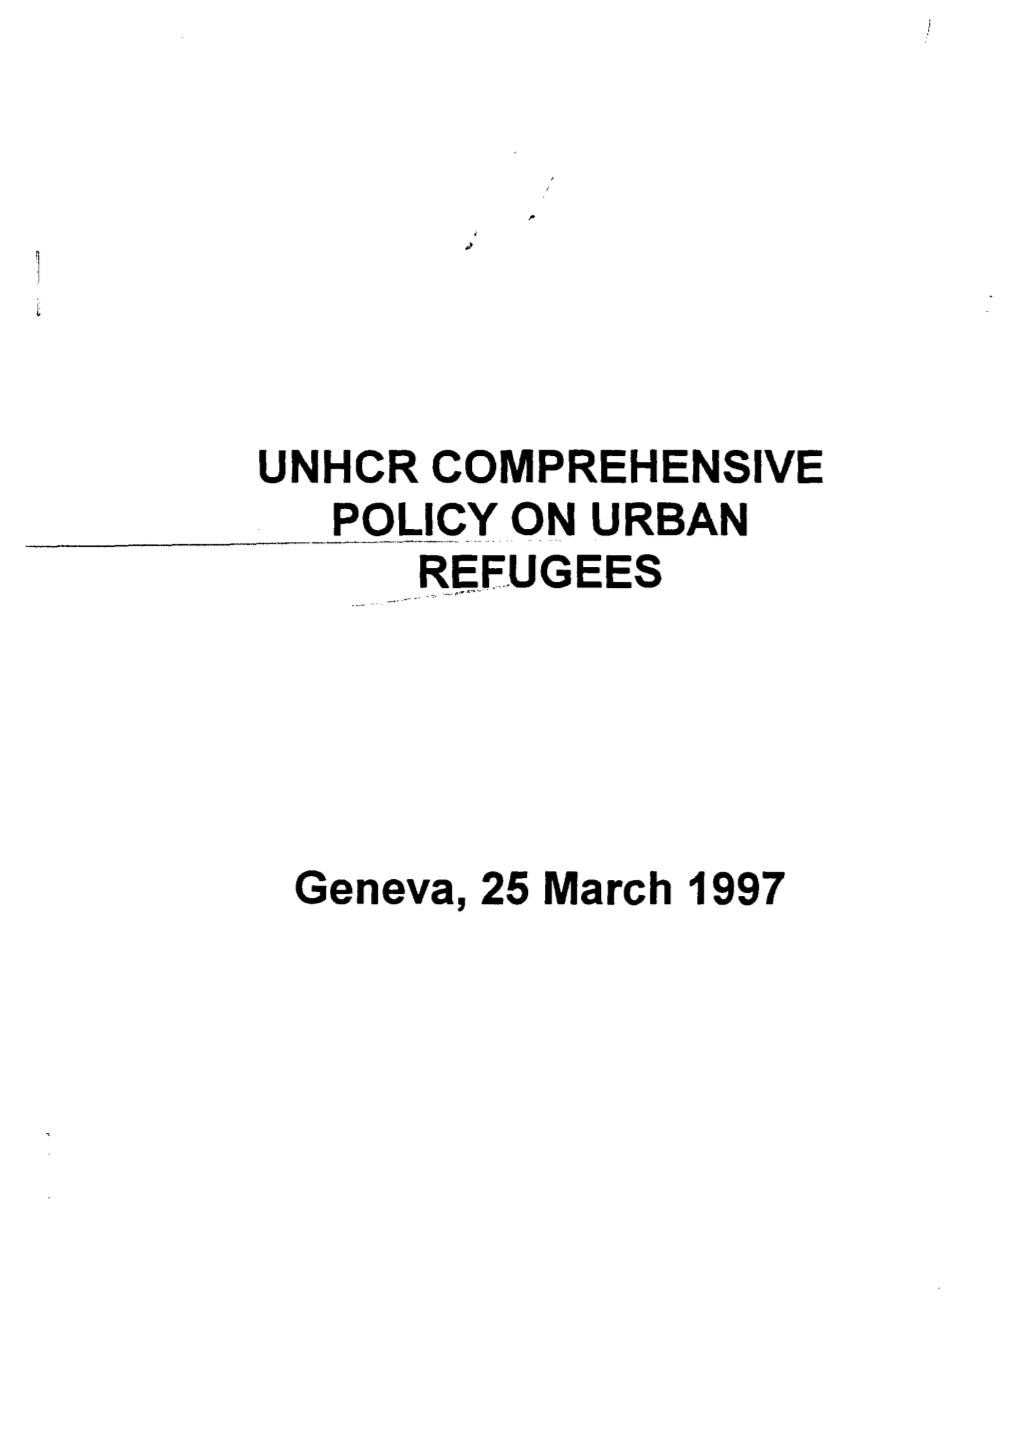 Unhcr Comprehensive Policy on Urban Refugees